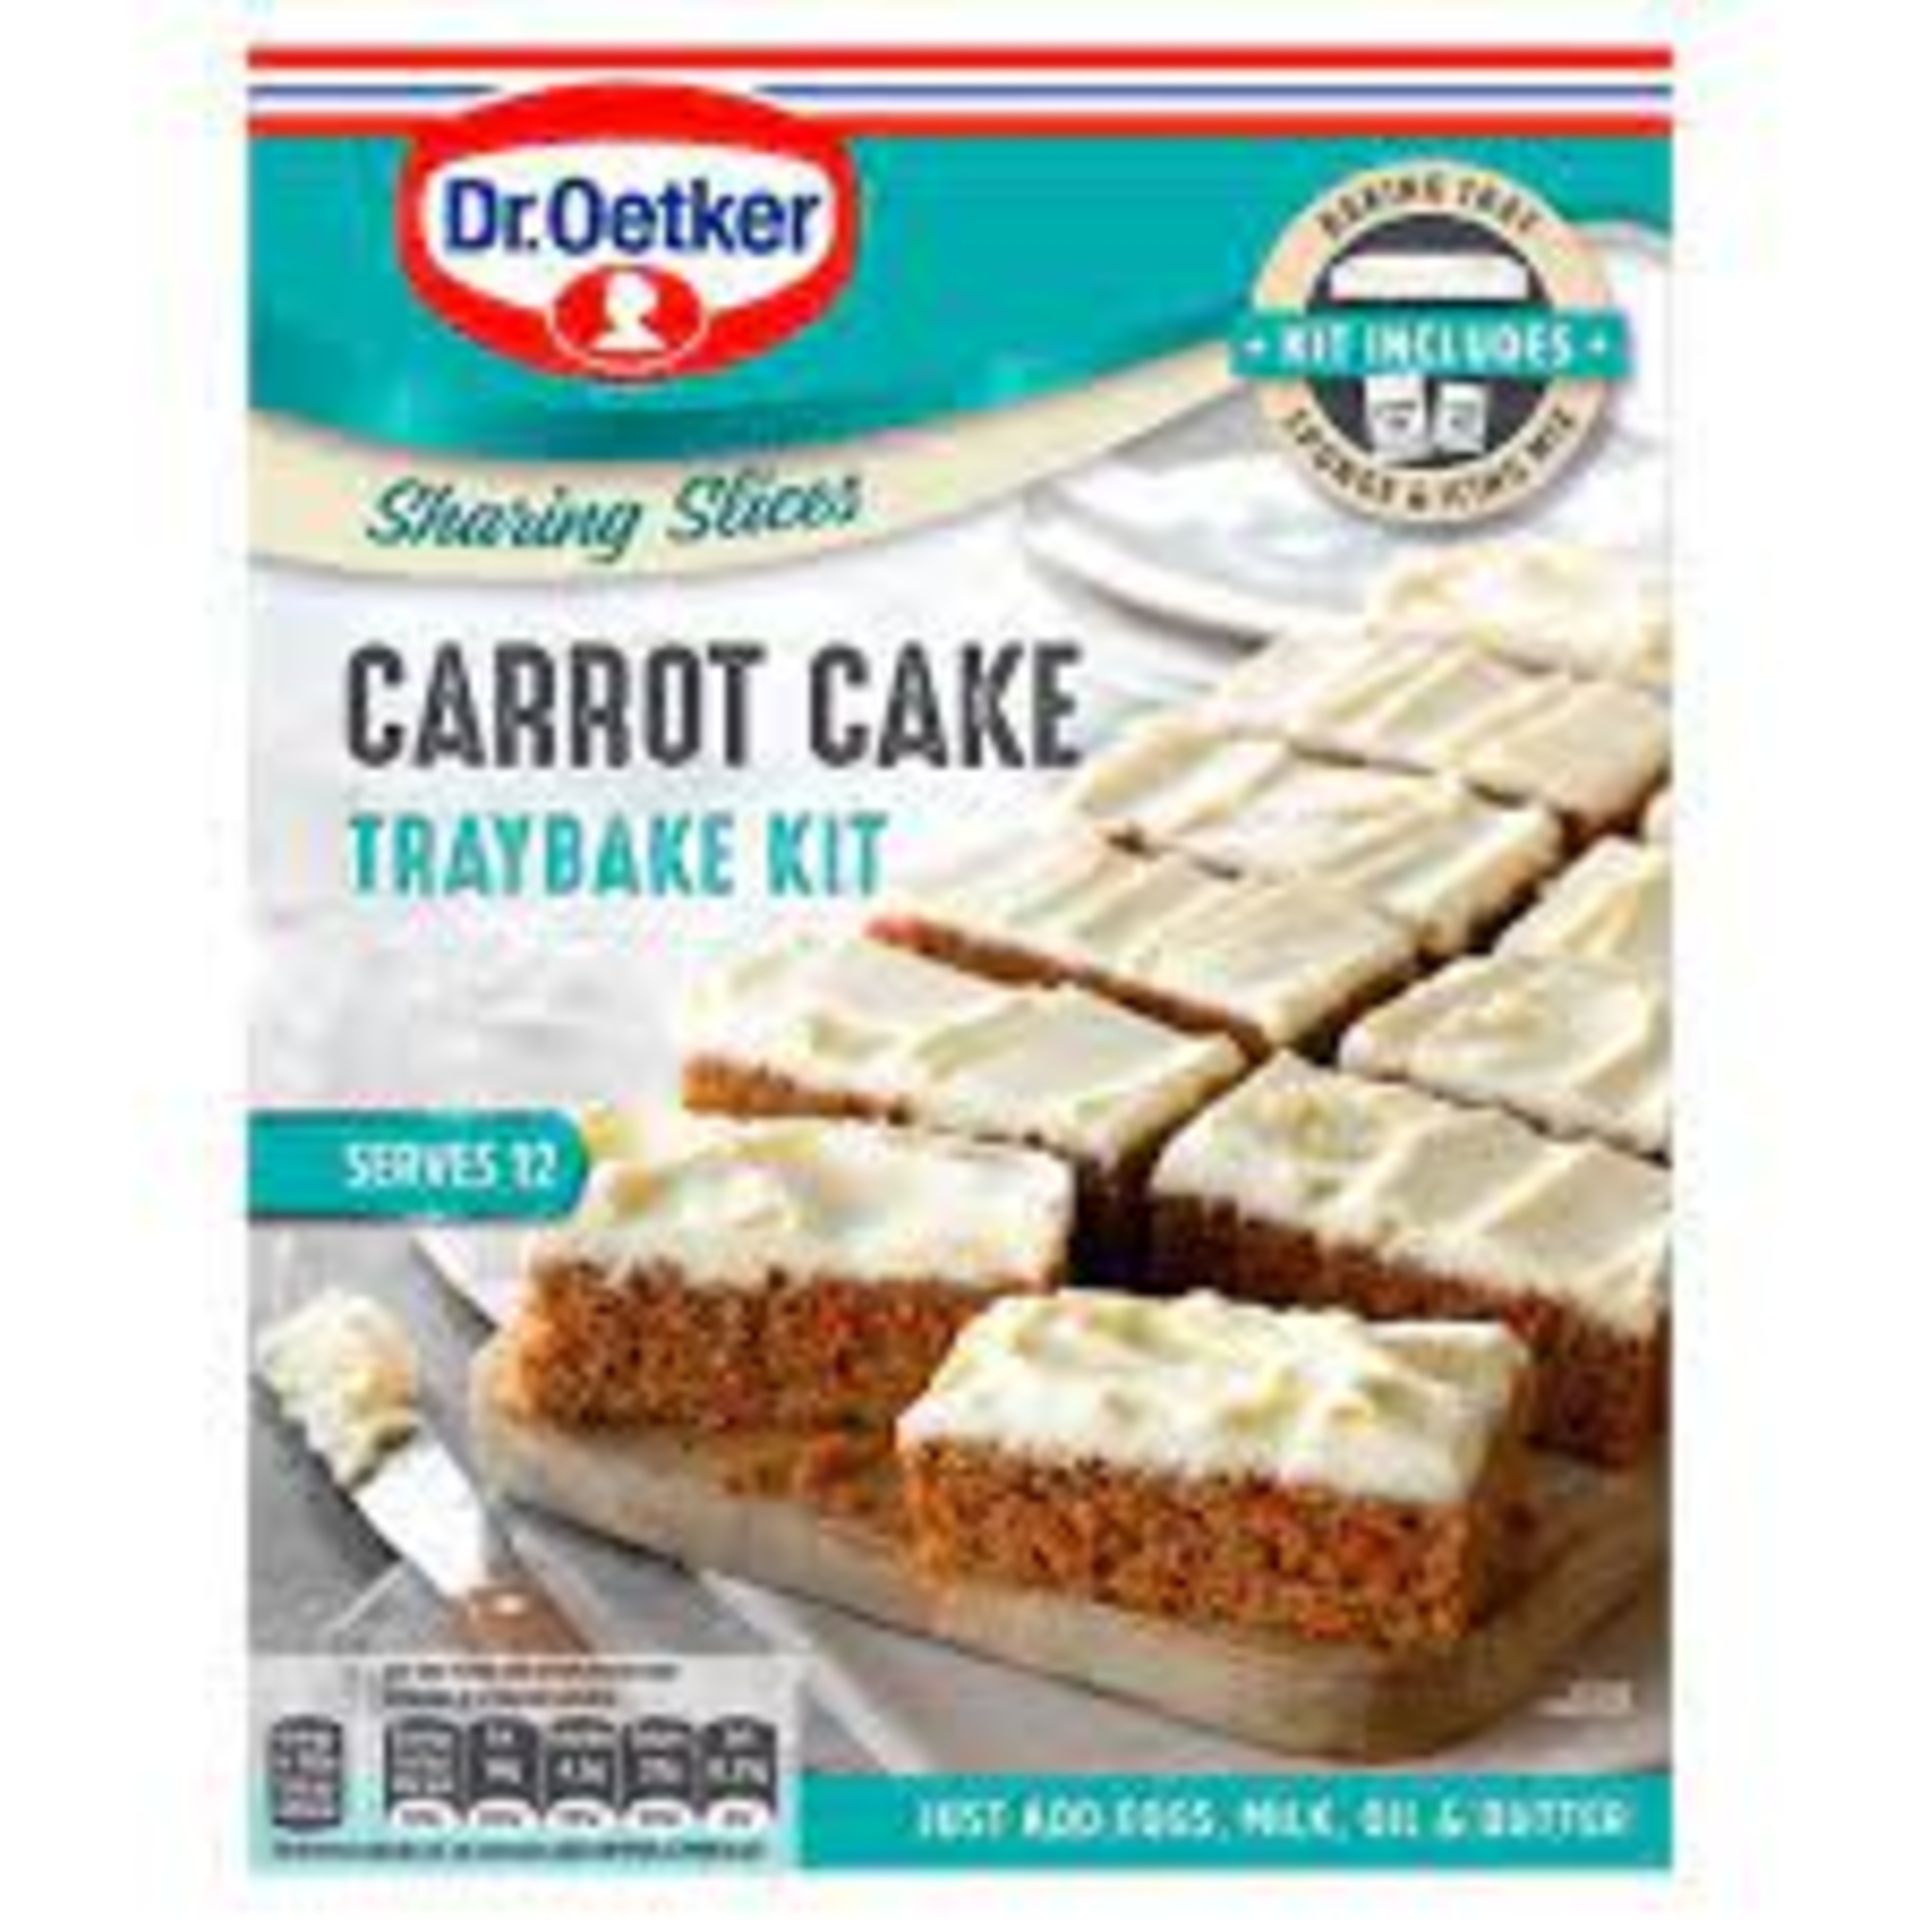 RRP £493 (Approx. Count 43) spW44f1217F 15 x Dr. Oetker Carrot Cake Traybake Kit 425 g, Pack of 4  2